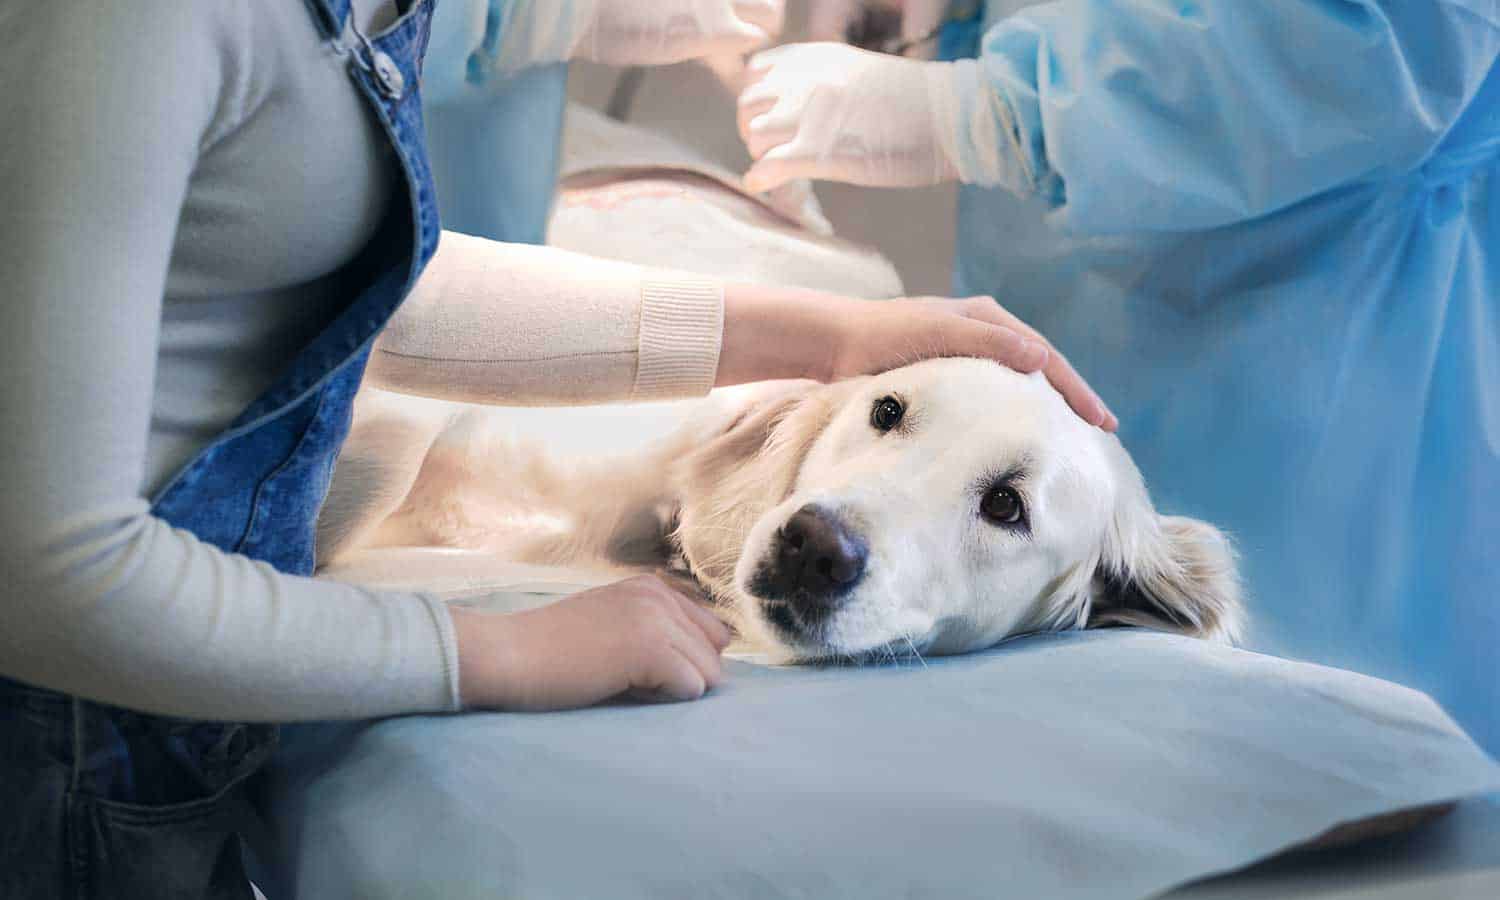 A golden retriever being treated for an injury